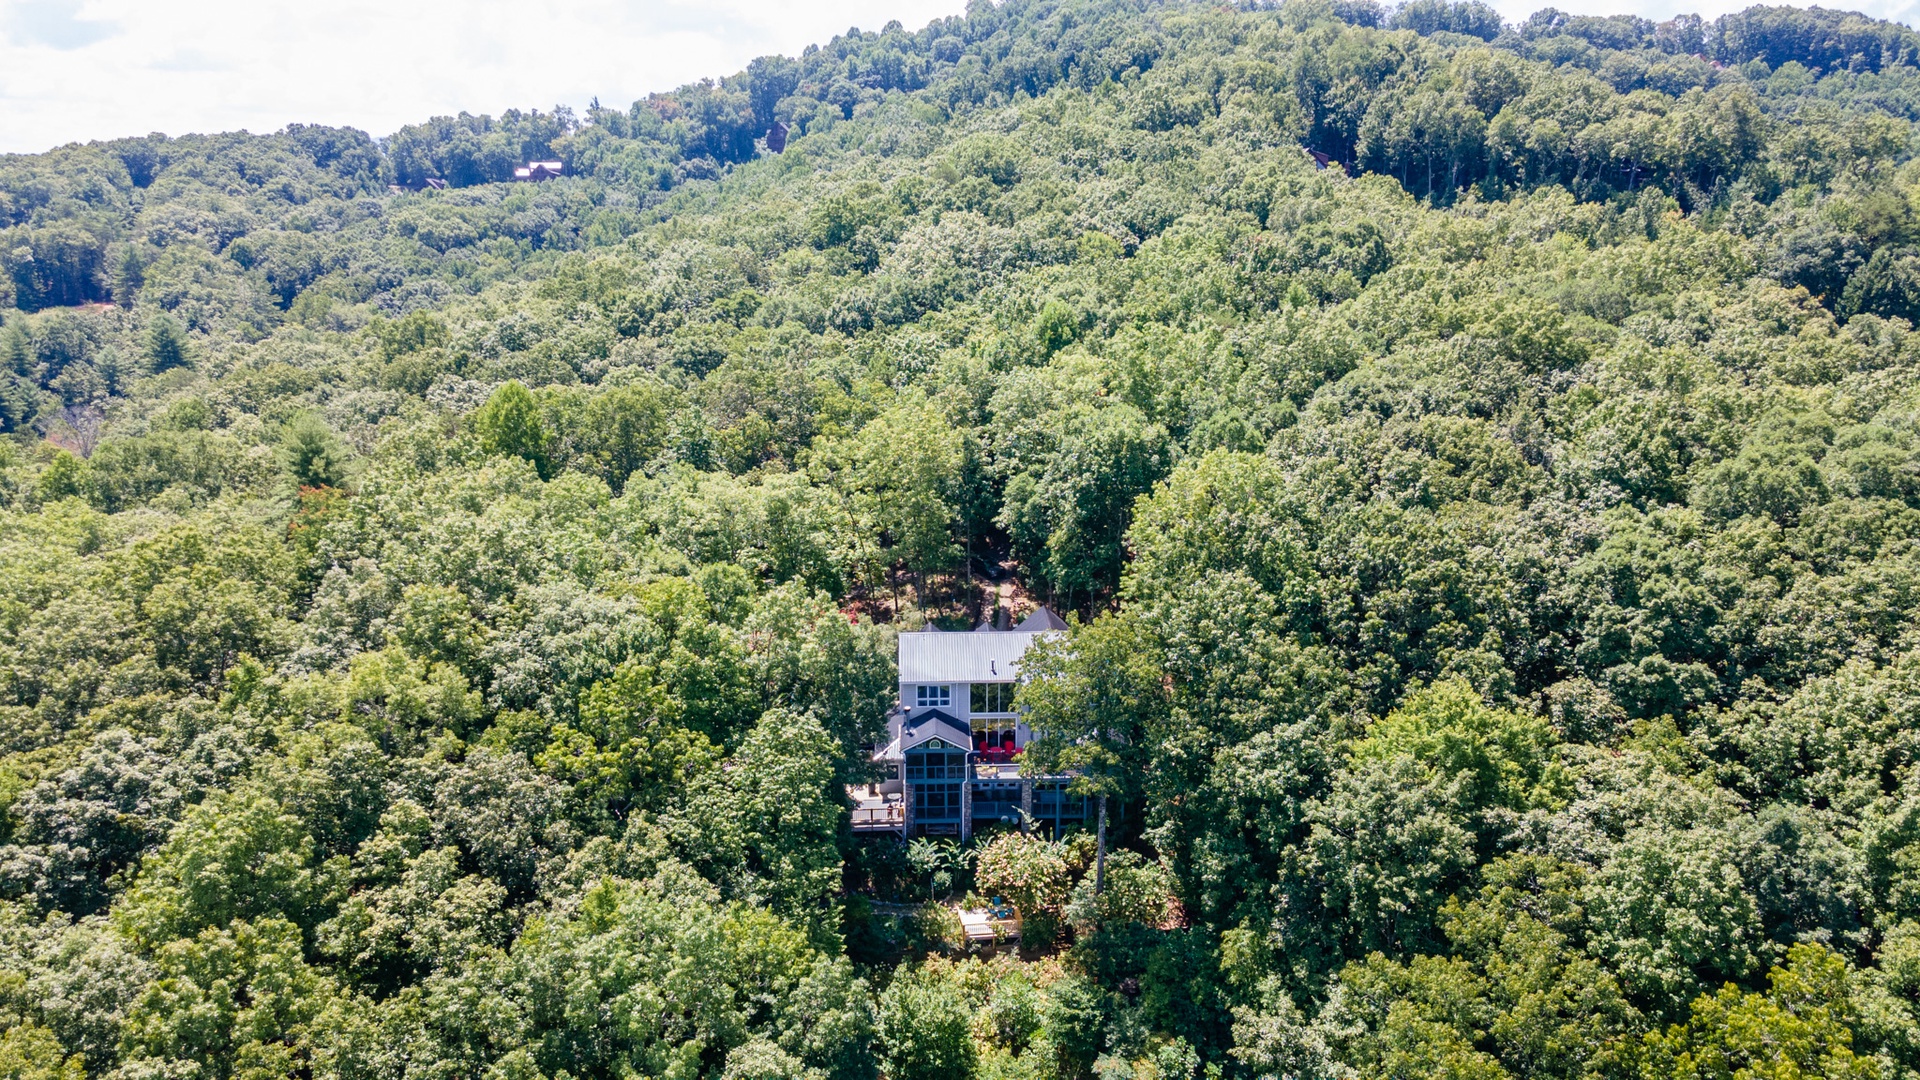 The House on the Hill: aerial view